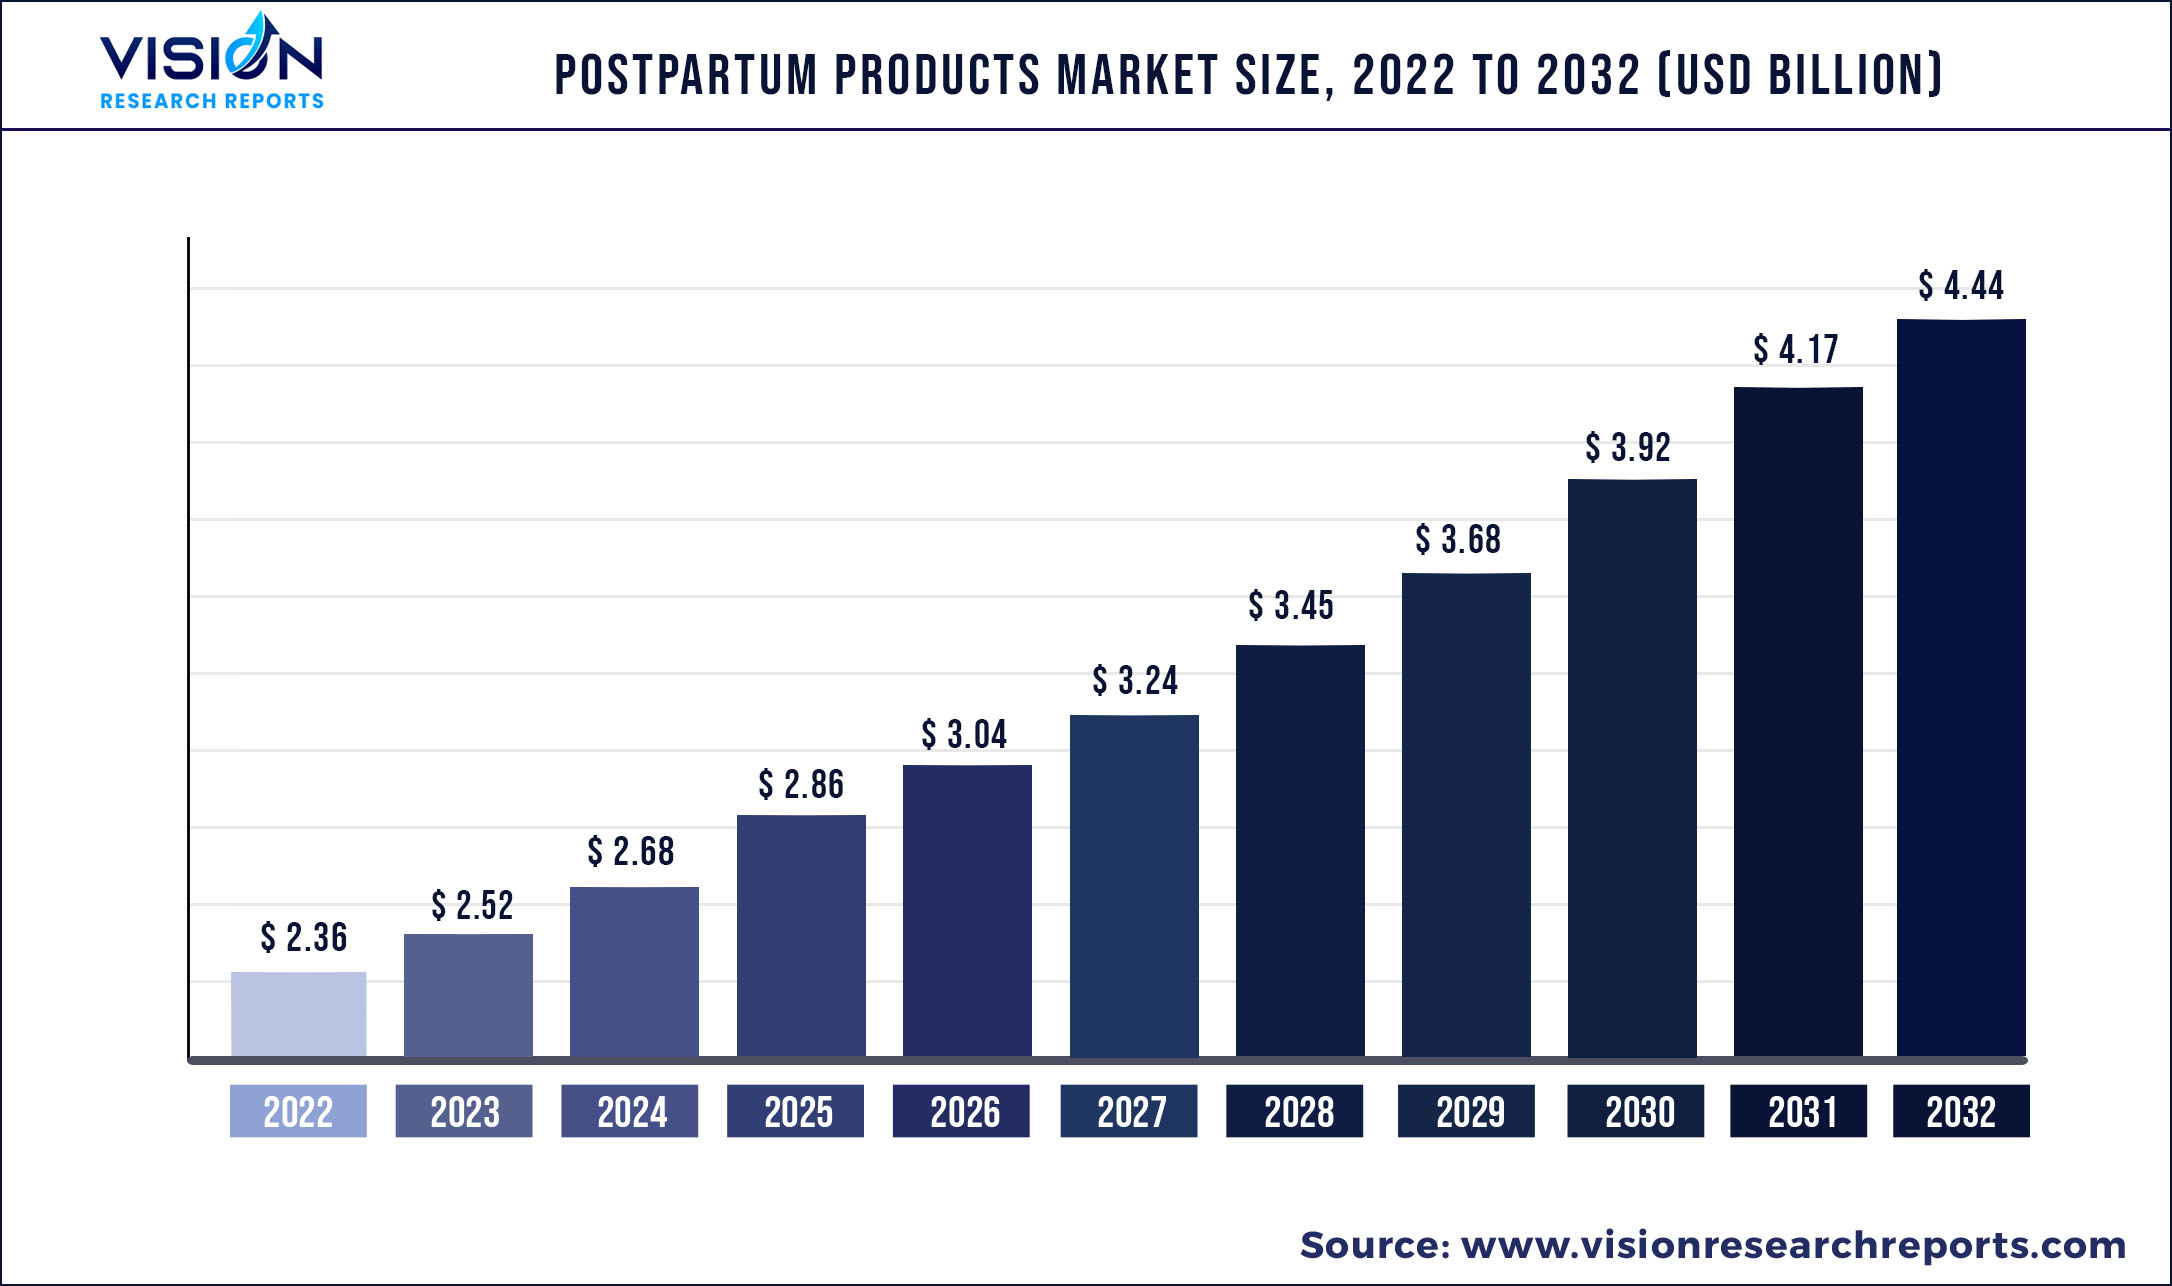 Postpartum Products Market Size 2023 to 2032